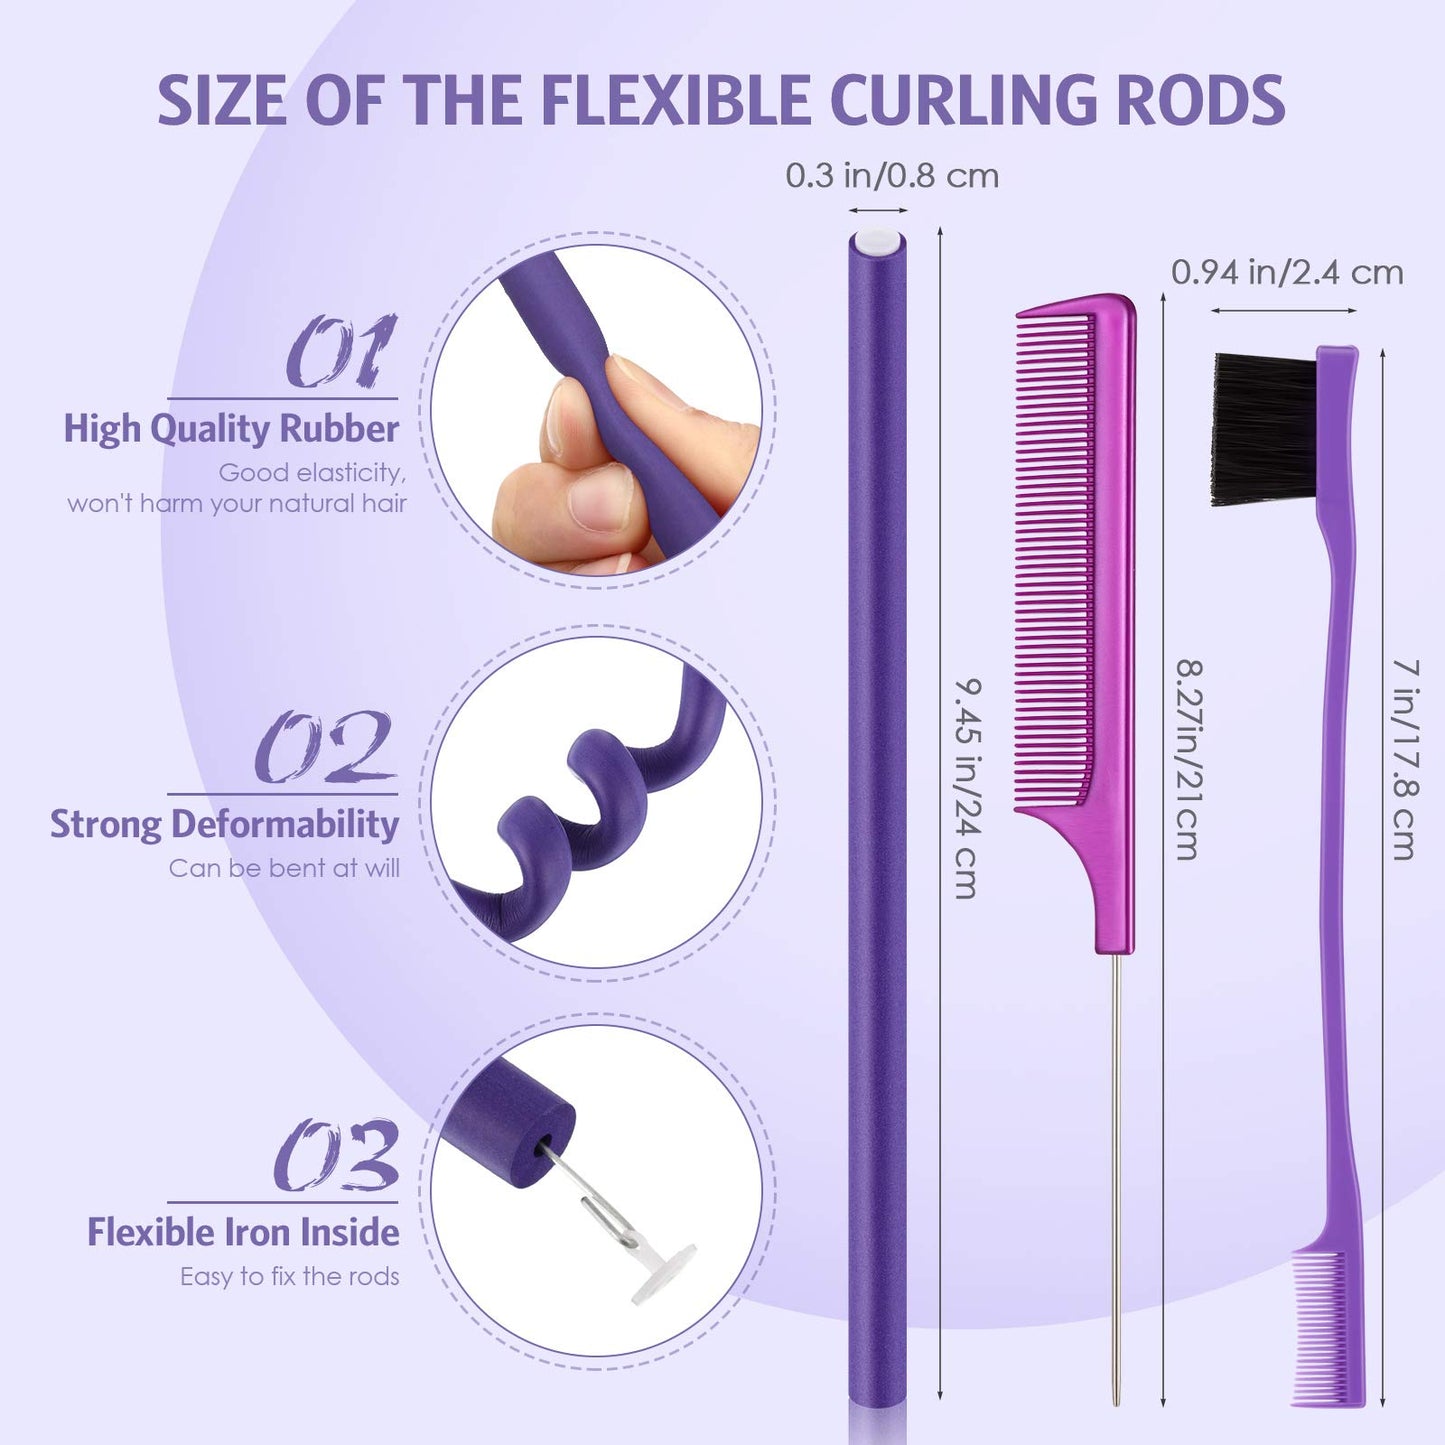 36 Pieces Flexible Foam Curling Rods Twist Foam Hair Roller Bendy Rollers Soft No Heat Hair Rollers and Hair Edge Brush Rat Tail Comb for Women Girls Short, Medium, Long Hair (Purple,0.32 x 9.4 Inch)